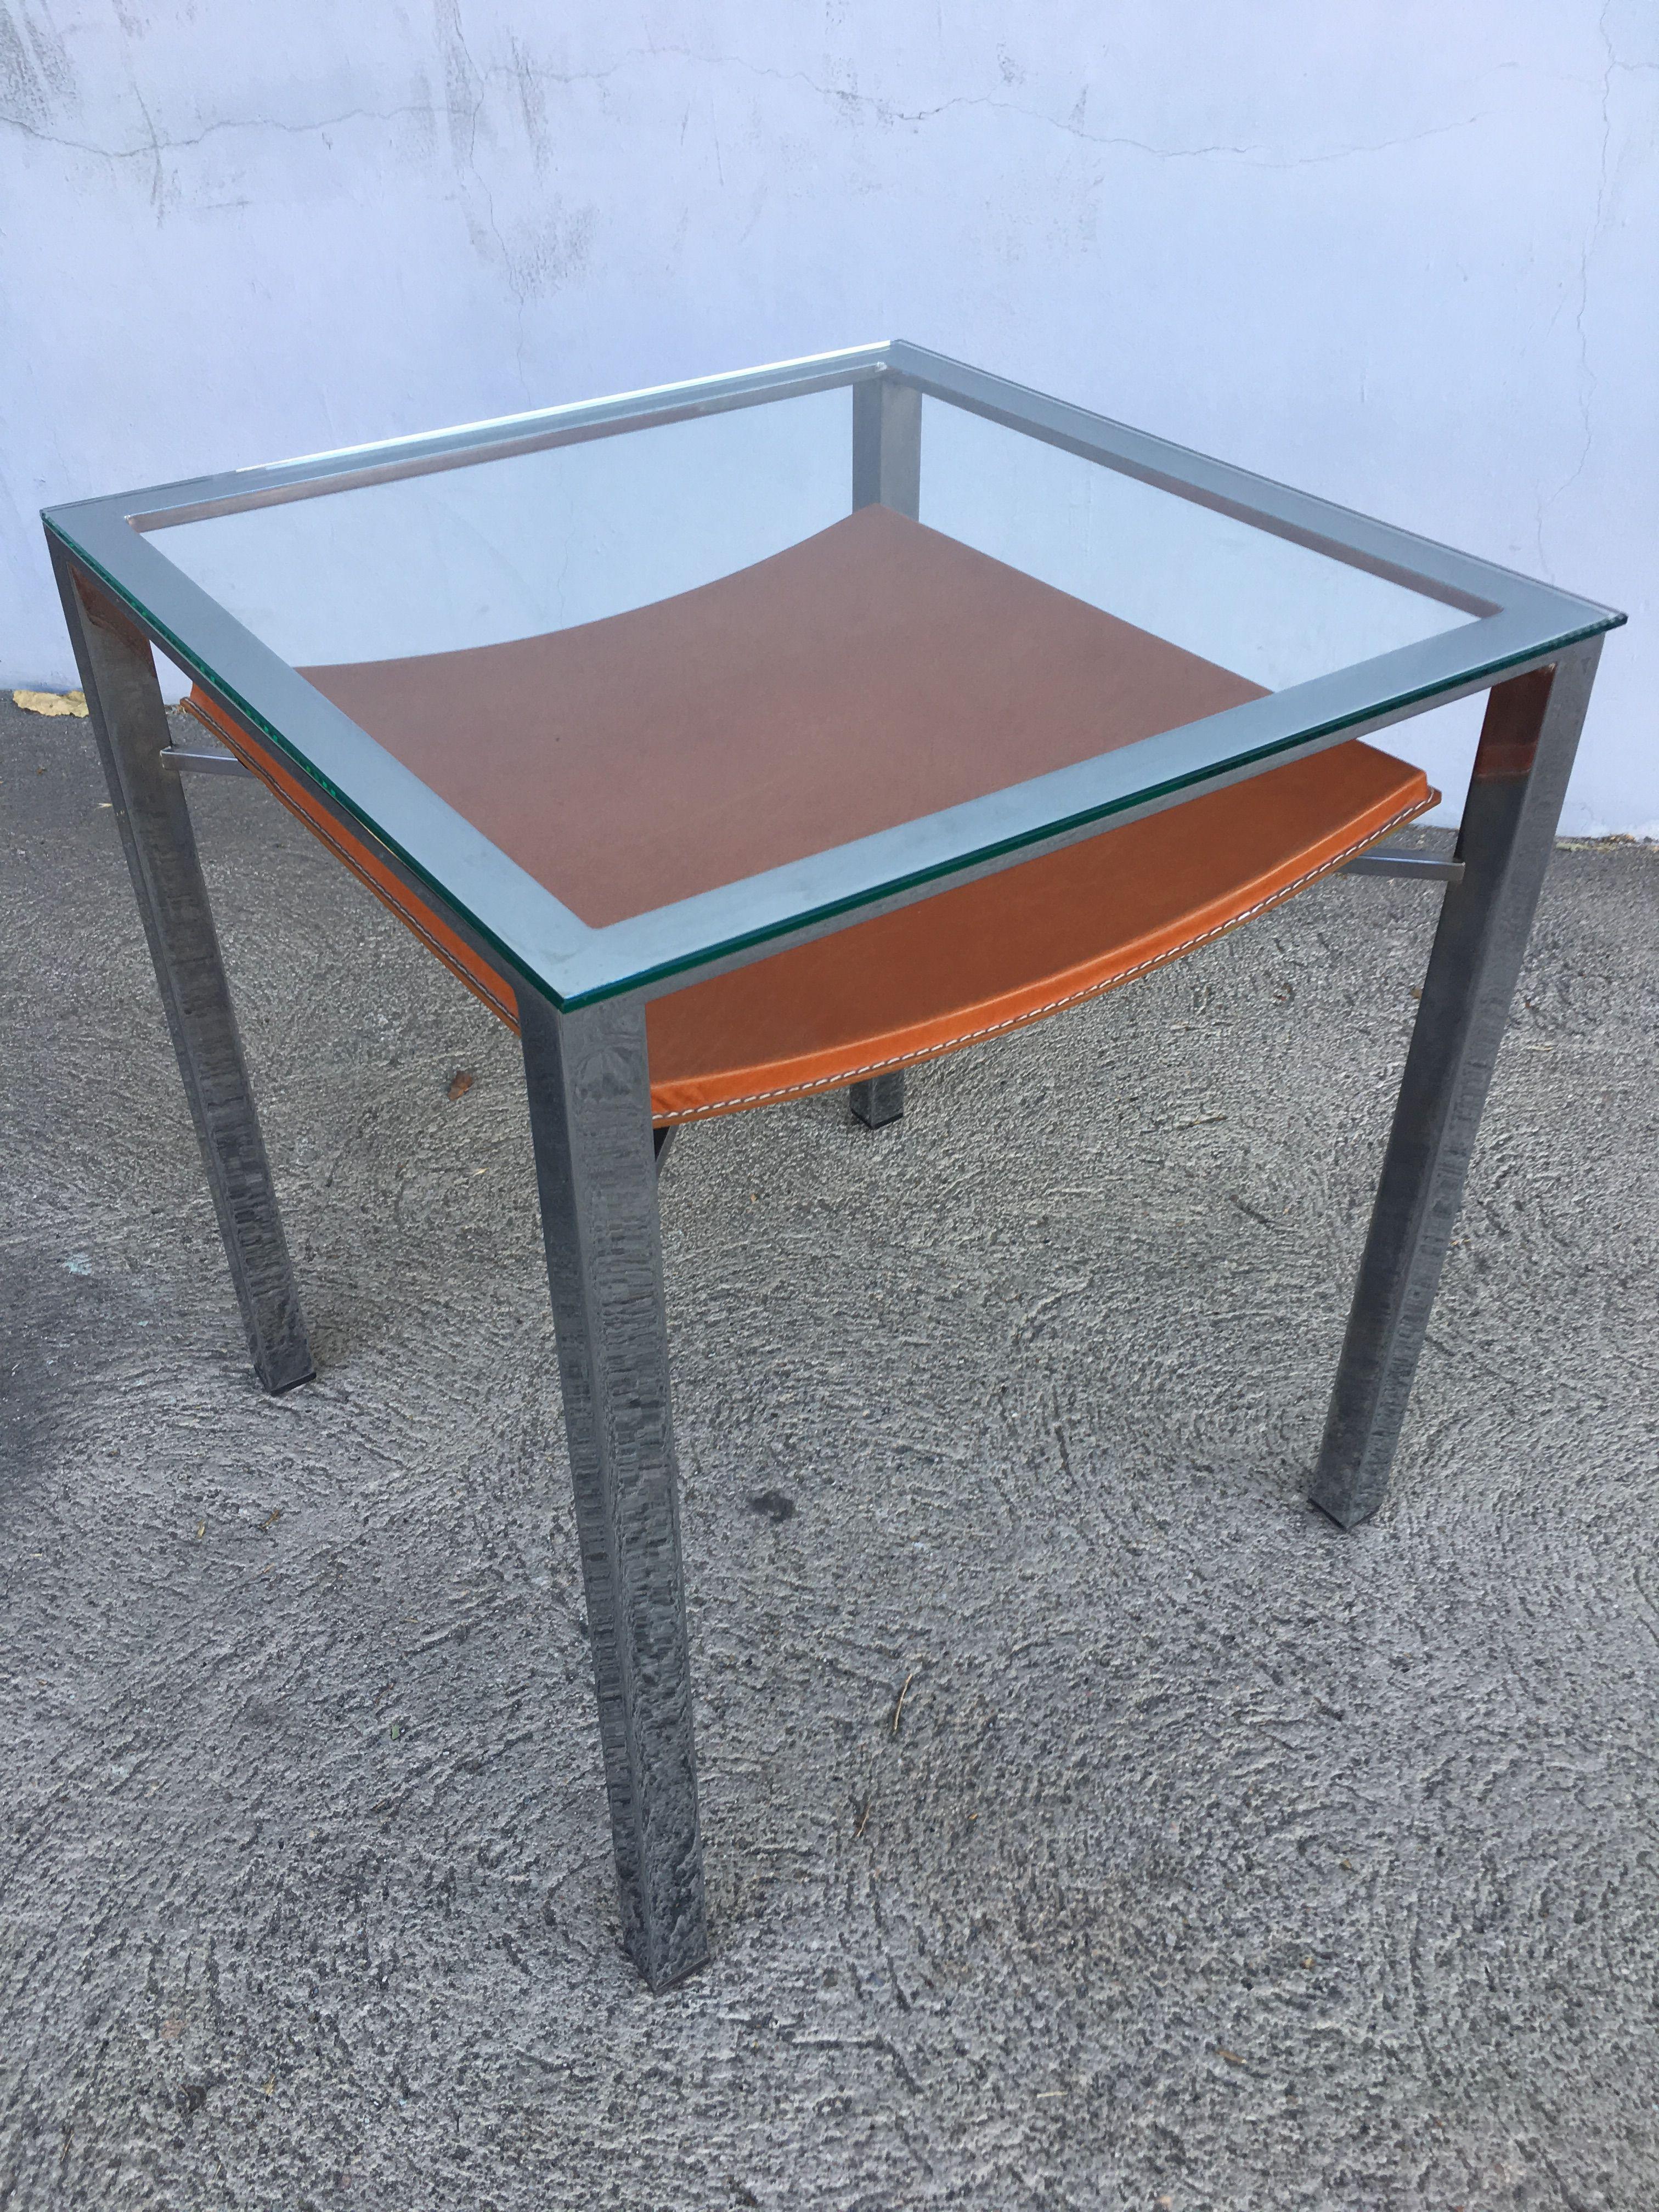 Chrome Tubular Glass Top Side Table with Leather Wrapped Magazine Rack In Excellent Condition For Sale In Van Nuys, CA